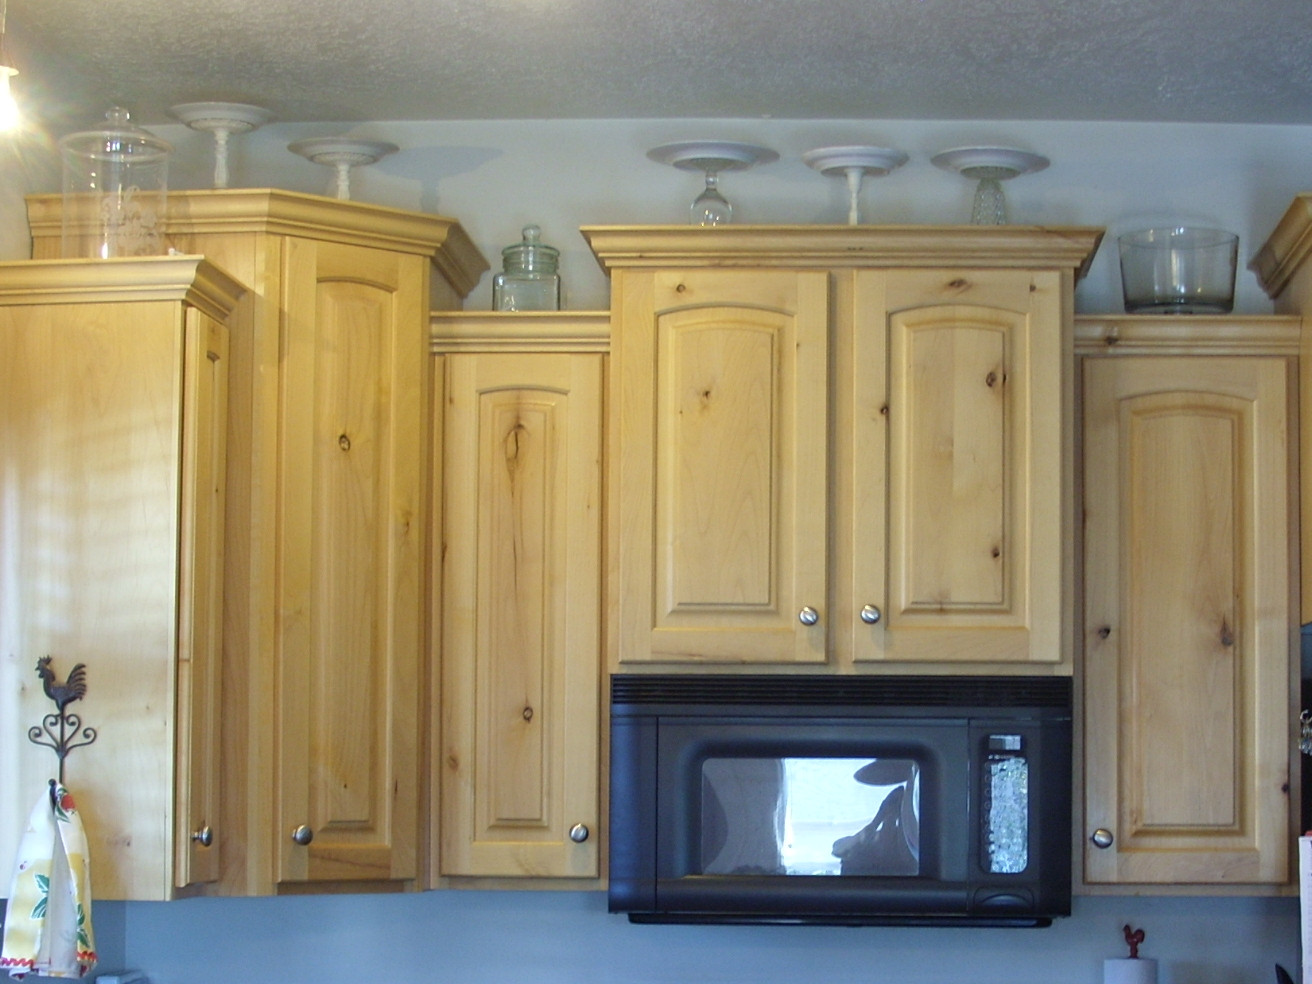 Top Of Kitchen Cabinet Decorations
 Decorating the Top of the Kitchen Cabinets Organize and